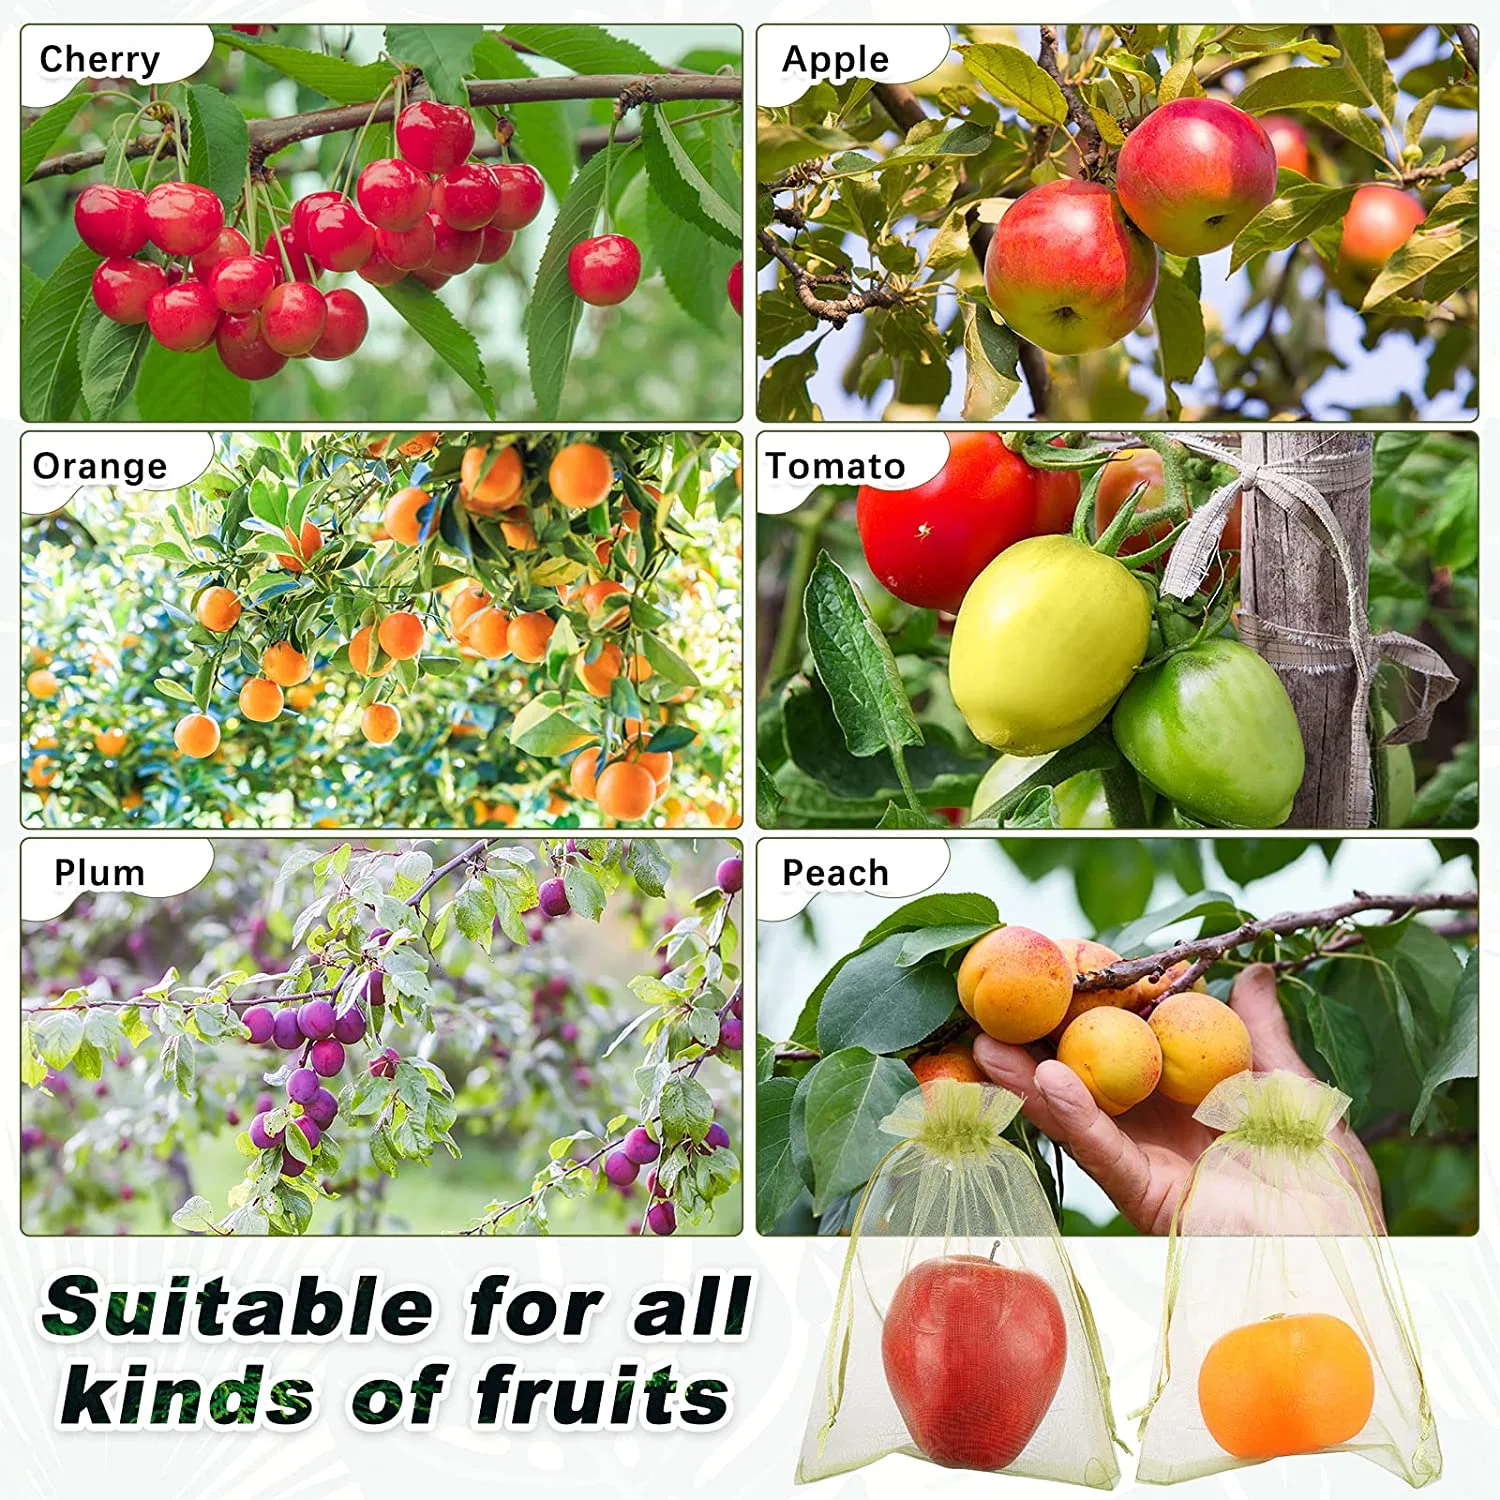 Garden Plant Netting, Blueberry Bushes, Tomato Fruit Tree Covers, Garden Plant Protectors, Plant Bags Insects, Bird Food 4.92 X 3.3FT Protection Net